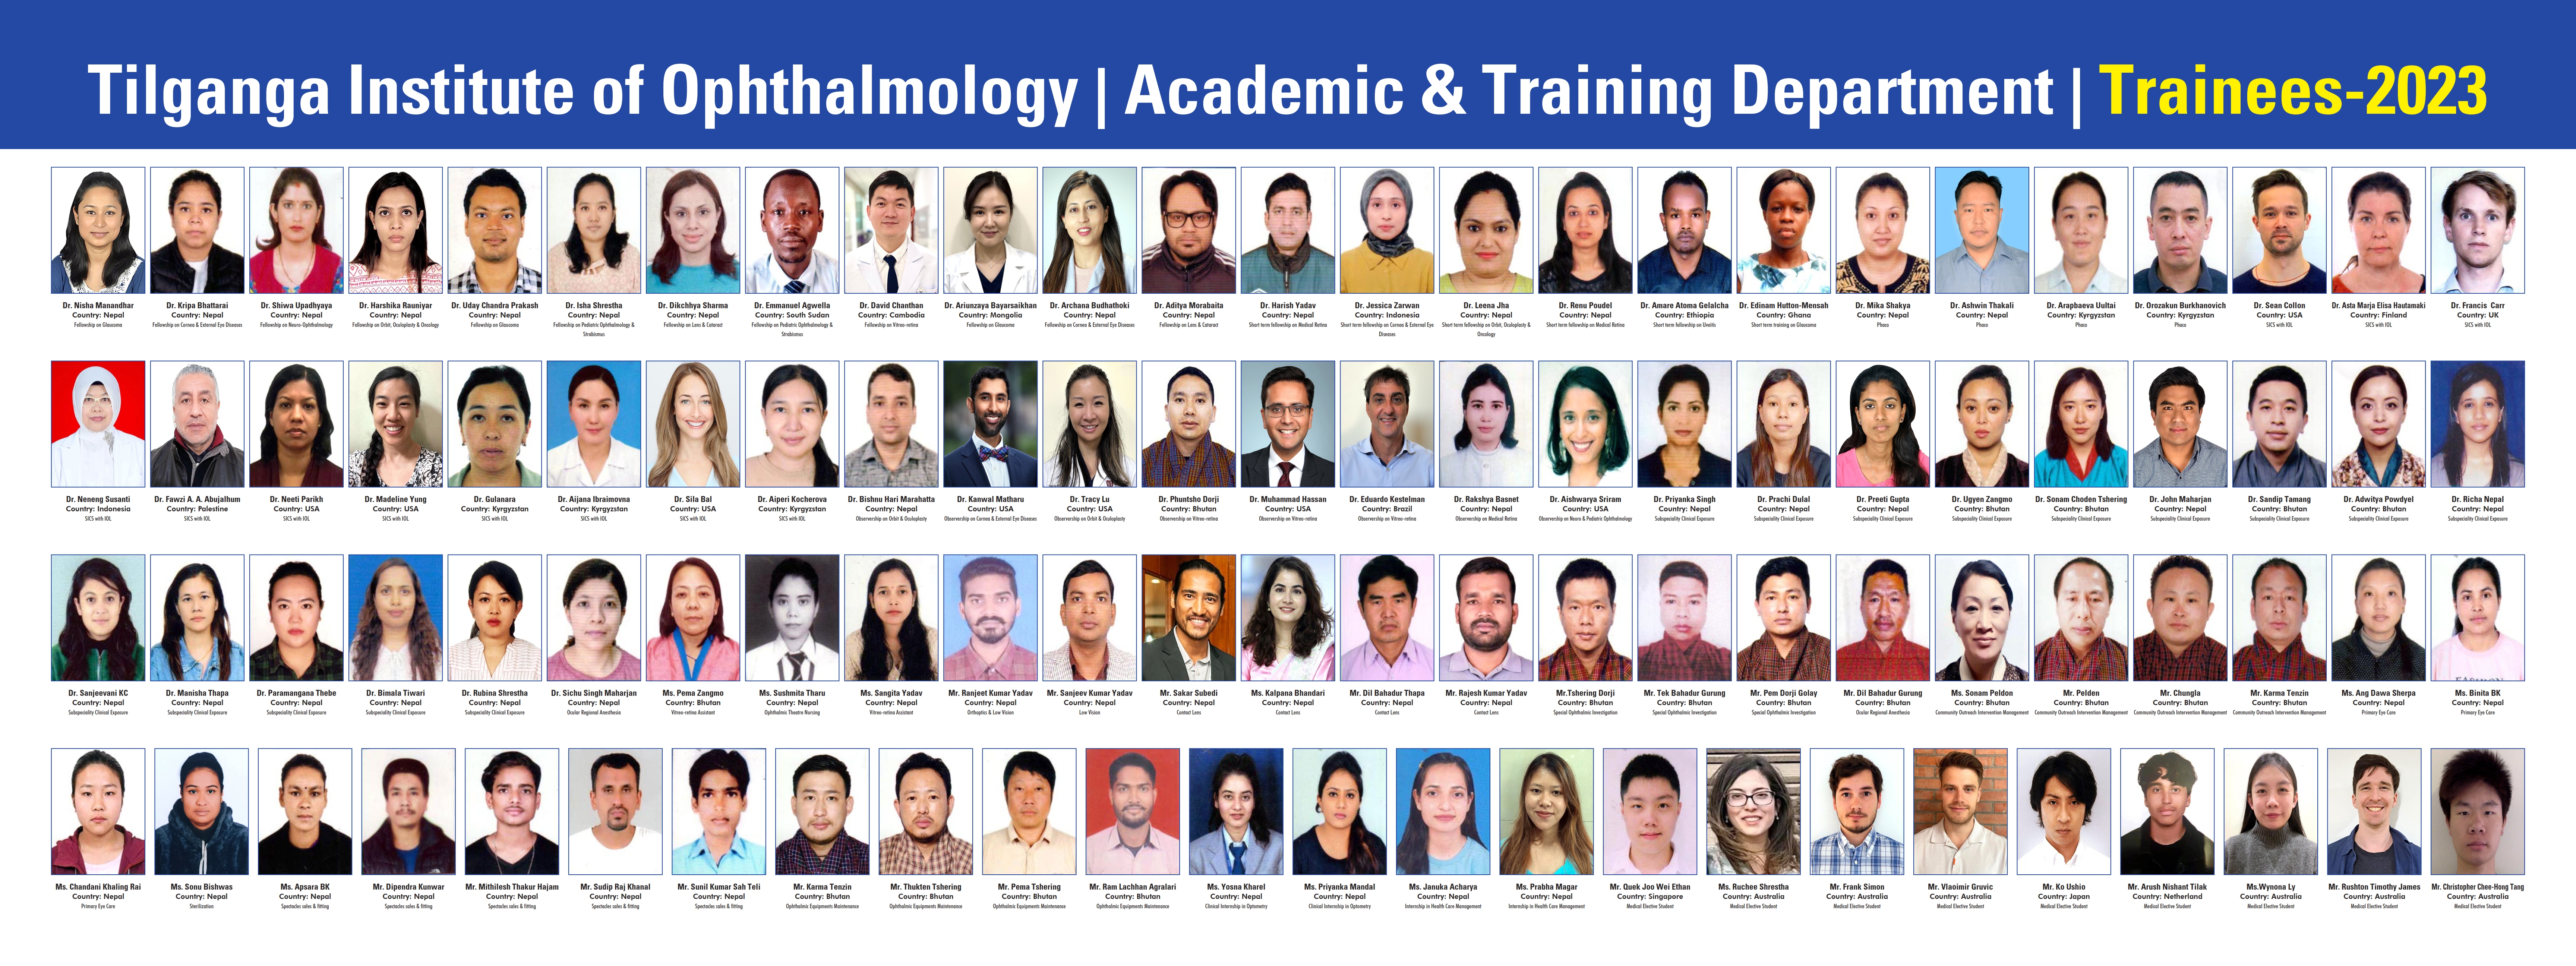 Fellows/Trainees at Tilganga Institute of Ophthalmology in 2023